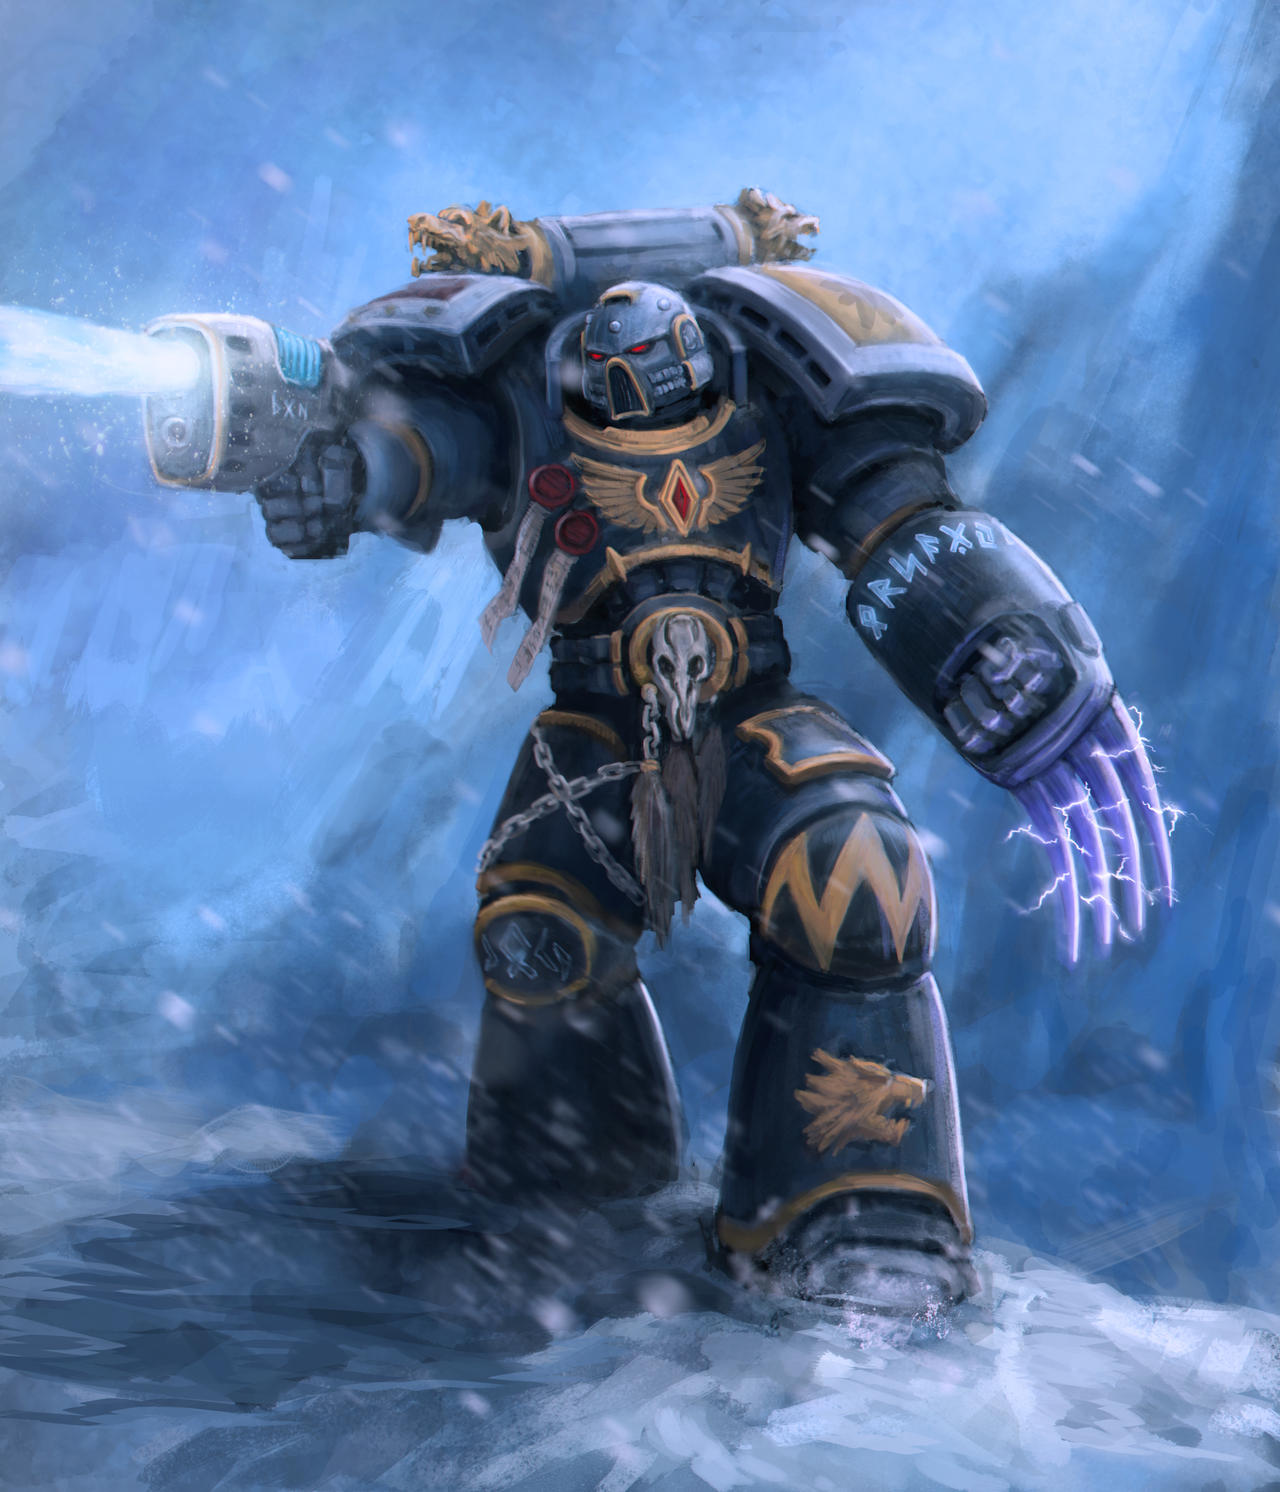 Grey Hunter of Space Wolves by sid-vlad on DeviantArt